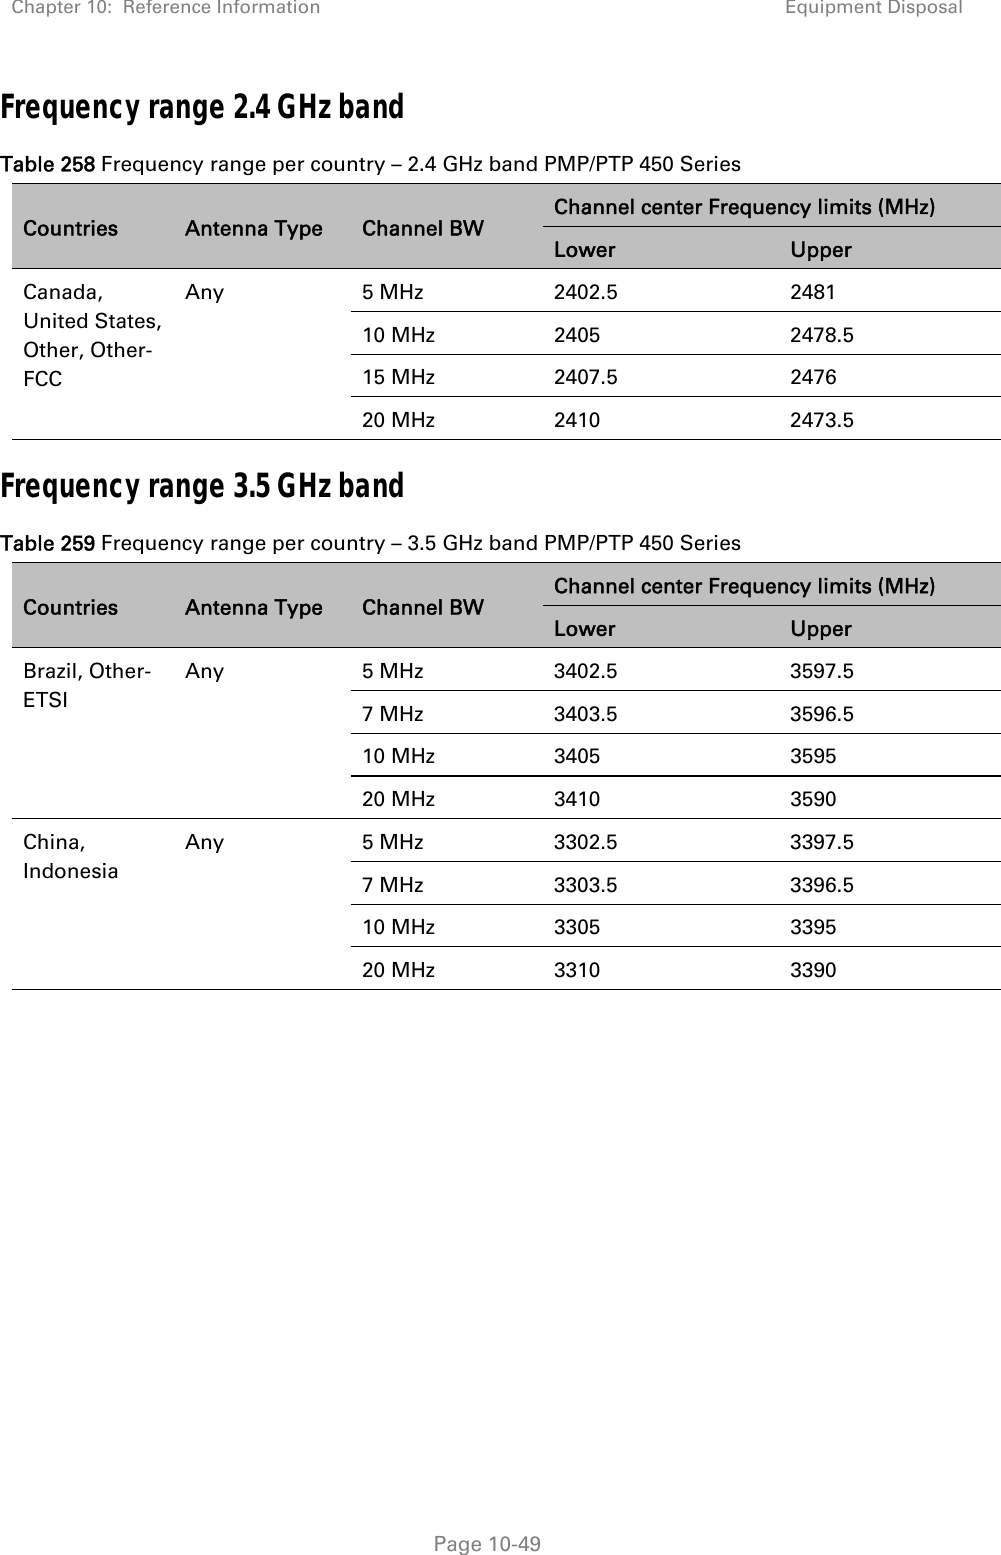 Chapter 10:  Reference Information Equipment Disposal   Page 10-49 Frequency range 2.4 GHz band Table 258 Frequency range per country – 2.4 GHz band PMP/PTP 450 Series  Countries  Antenna Type  Channel BW Channel center Frequency limits (MHz) Lower  Upper Canada, United States, Other, Other-FCC Any 5 MHz 2402.5  2481 10 MHz  2405  2478.5 15 MHz  2407.5  2476 20 MHz  2410  2473.5 Frequency range 3.5 GHz band Table 259 Frequency range per country – 3.5 GHz band PMP/PTP 450 Series  Countries  Antenna Type  Channel BW Channel center Frequency limits (MHz) Lower  Upper Brazil, Other-ETSI Any 5 MHz 3402.5  3597.5 7 MHz  3403.5  3596.5 10 MHz  3405  3595 20 MHz  3410  3590 China, Indonesia  Any 5 MHz 3302.5  3397.5 7 MHz  3303.5  3396.5 10 MHz  3305  3395 20 MHz  3310  3390   